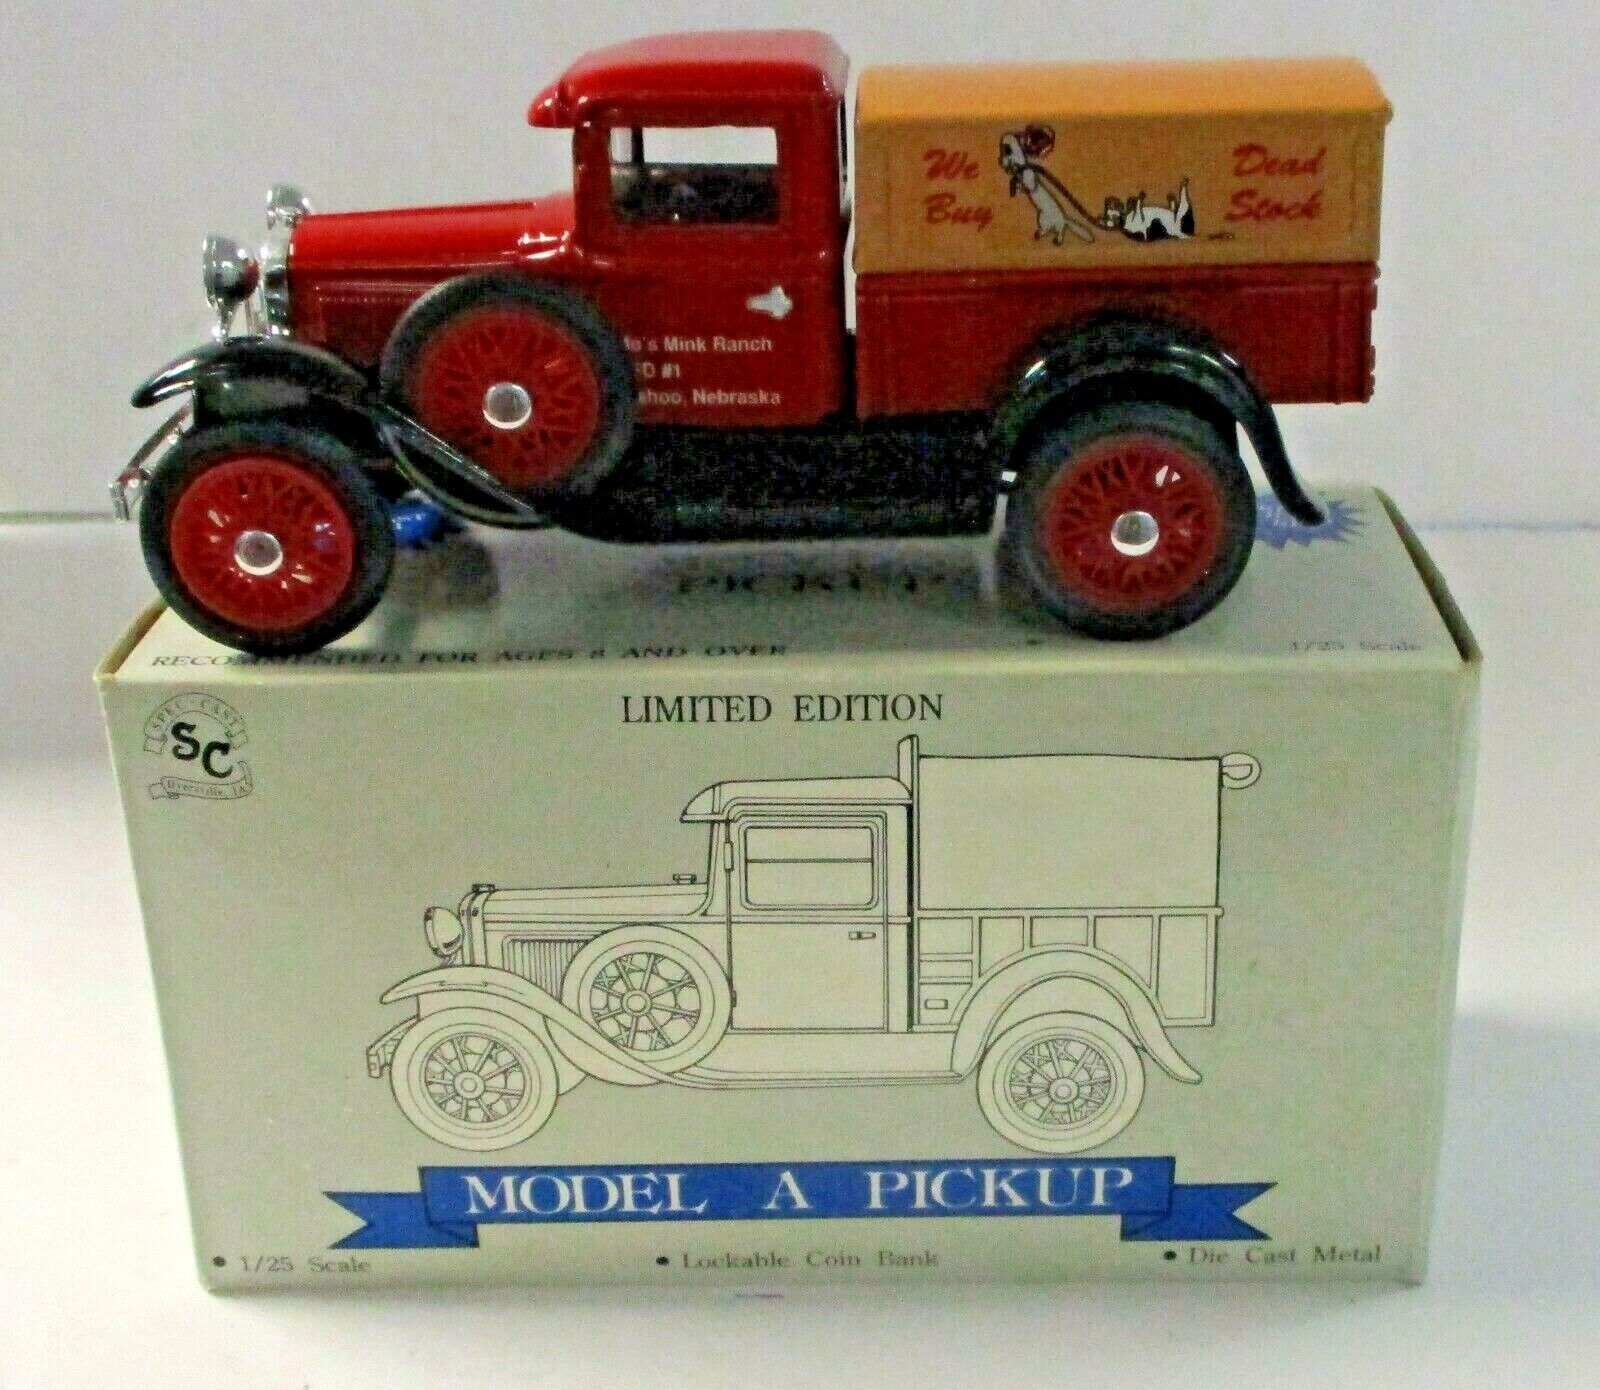 Liberty Diecast Model A Pickup Diecast Toy Bank - Dead Stock - Item No. 1069